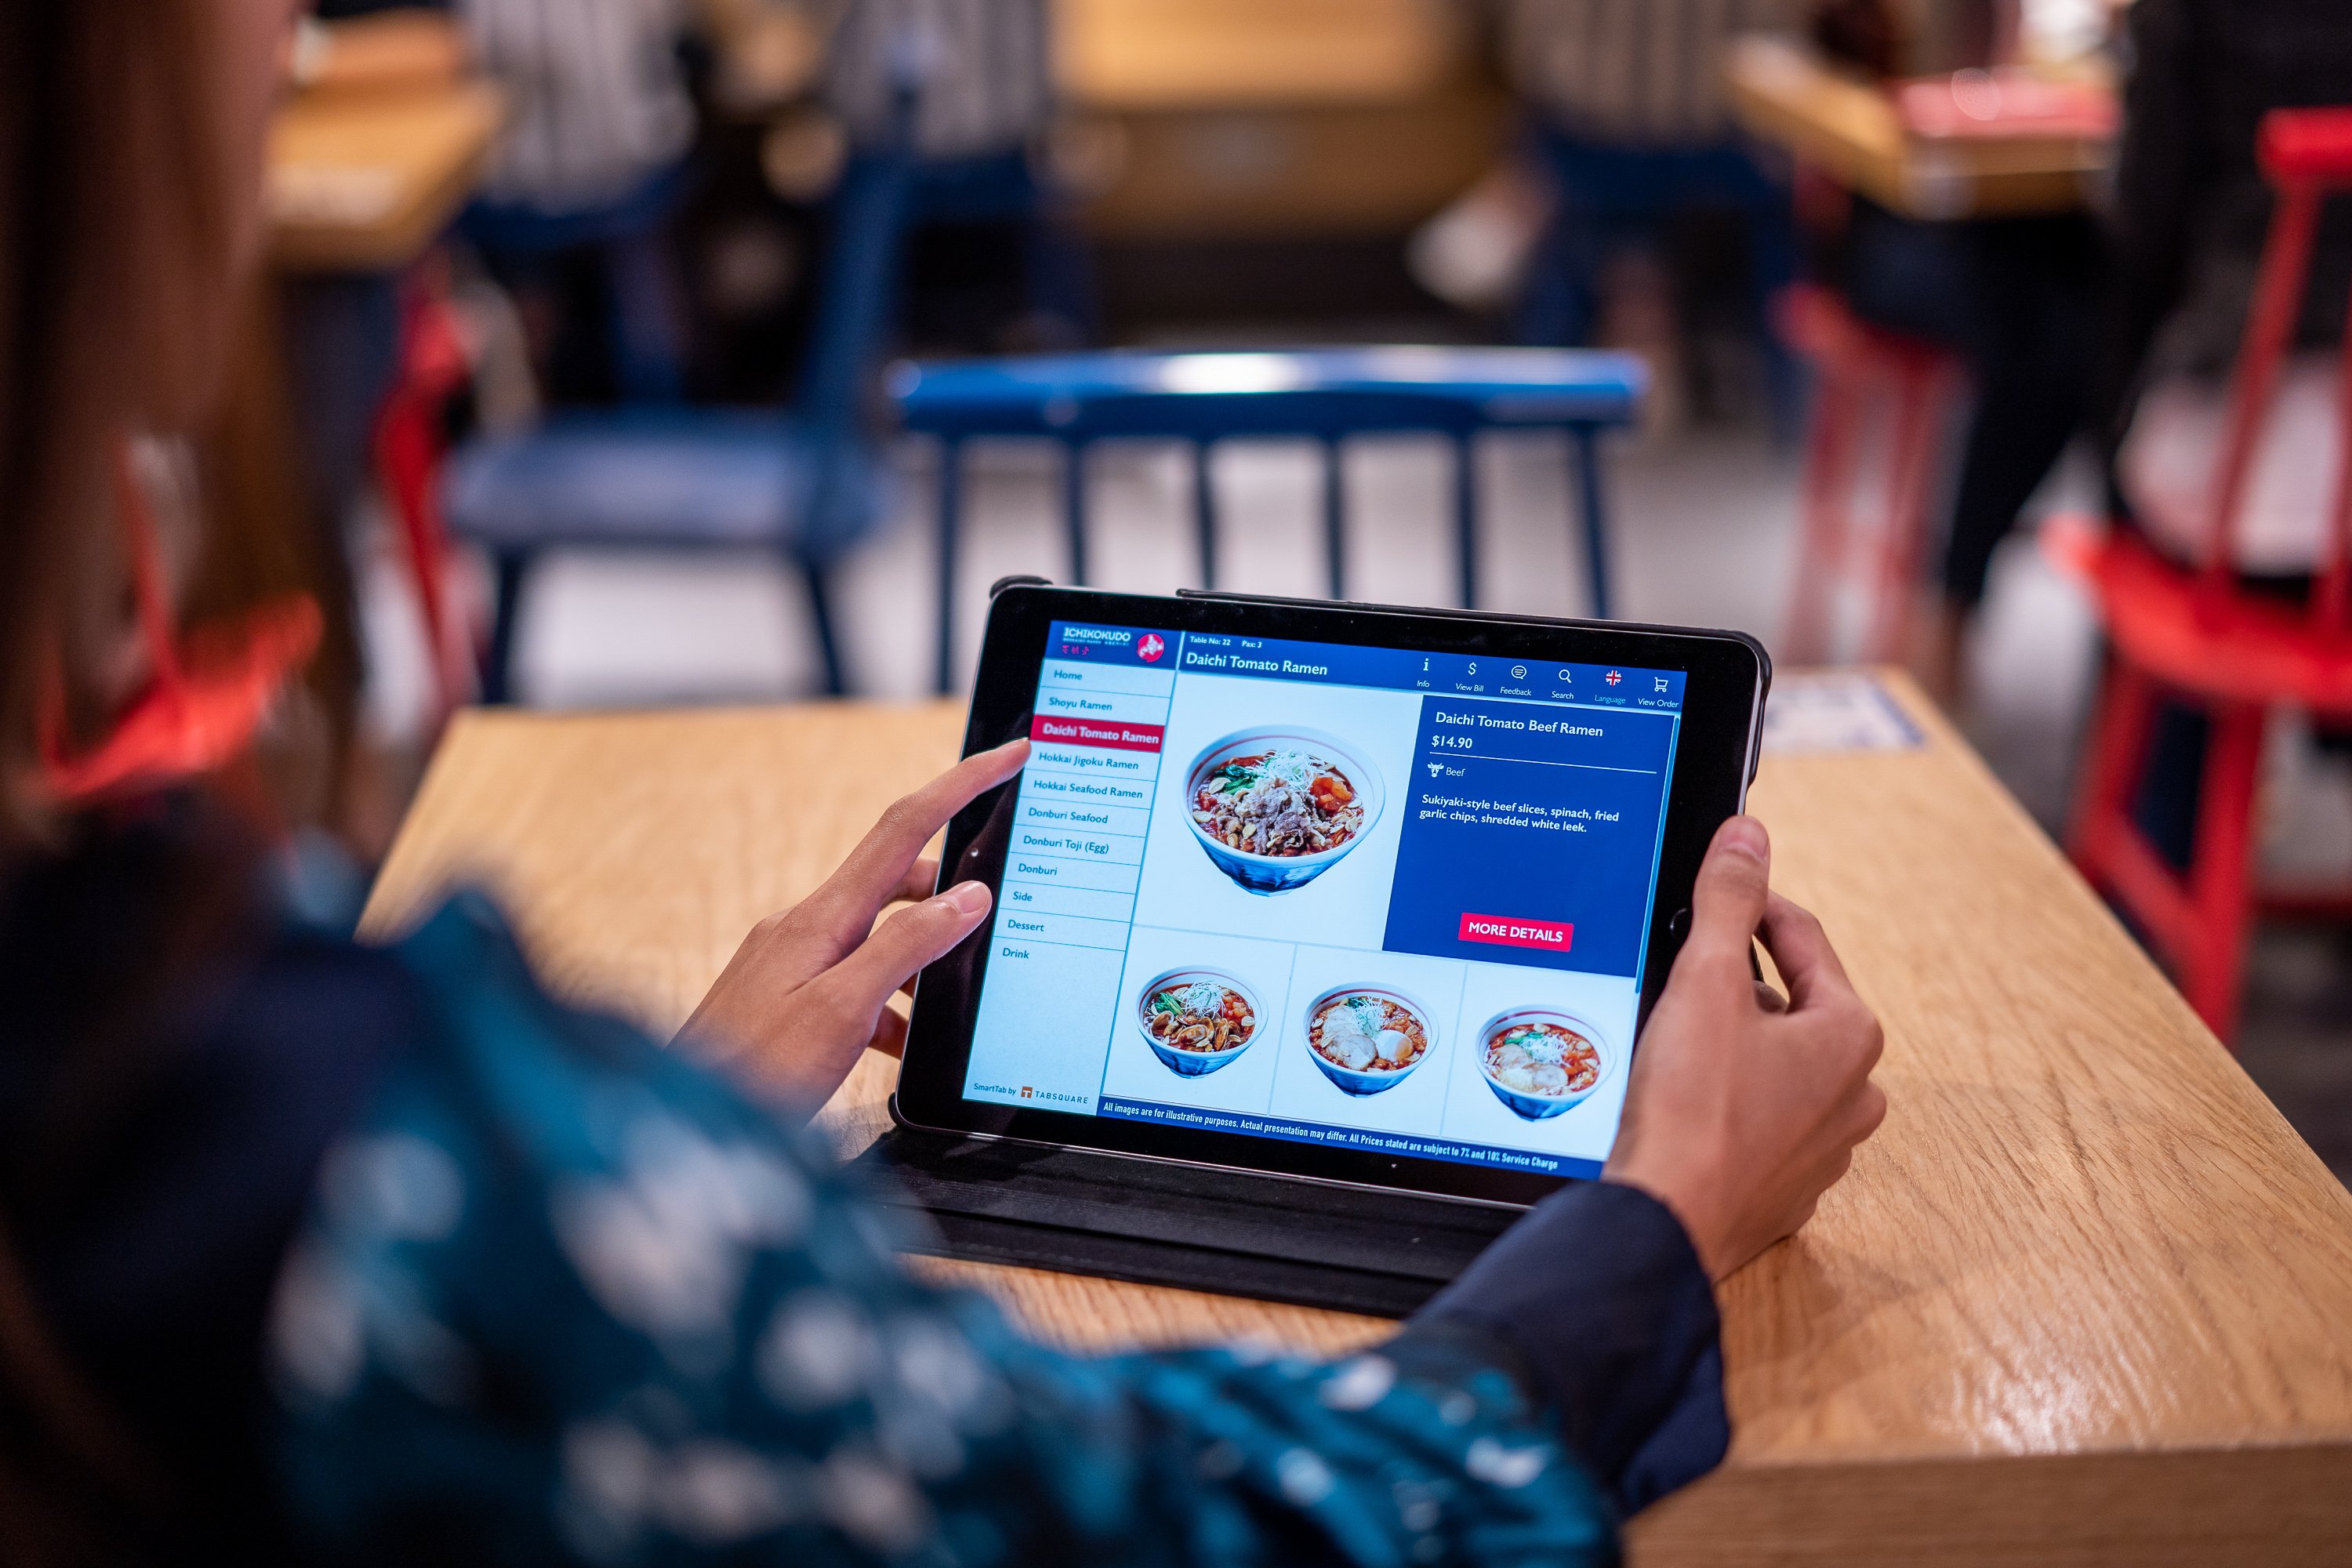 TabSquare’s SmartTab launches in famous ramen chain Ichikokudo